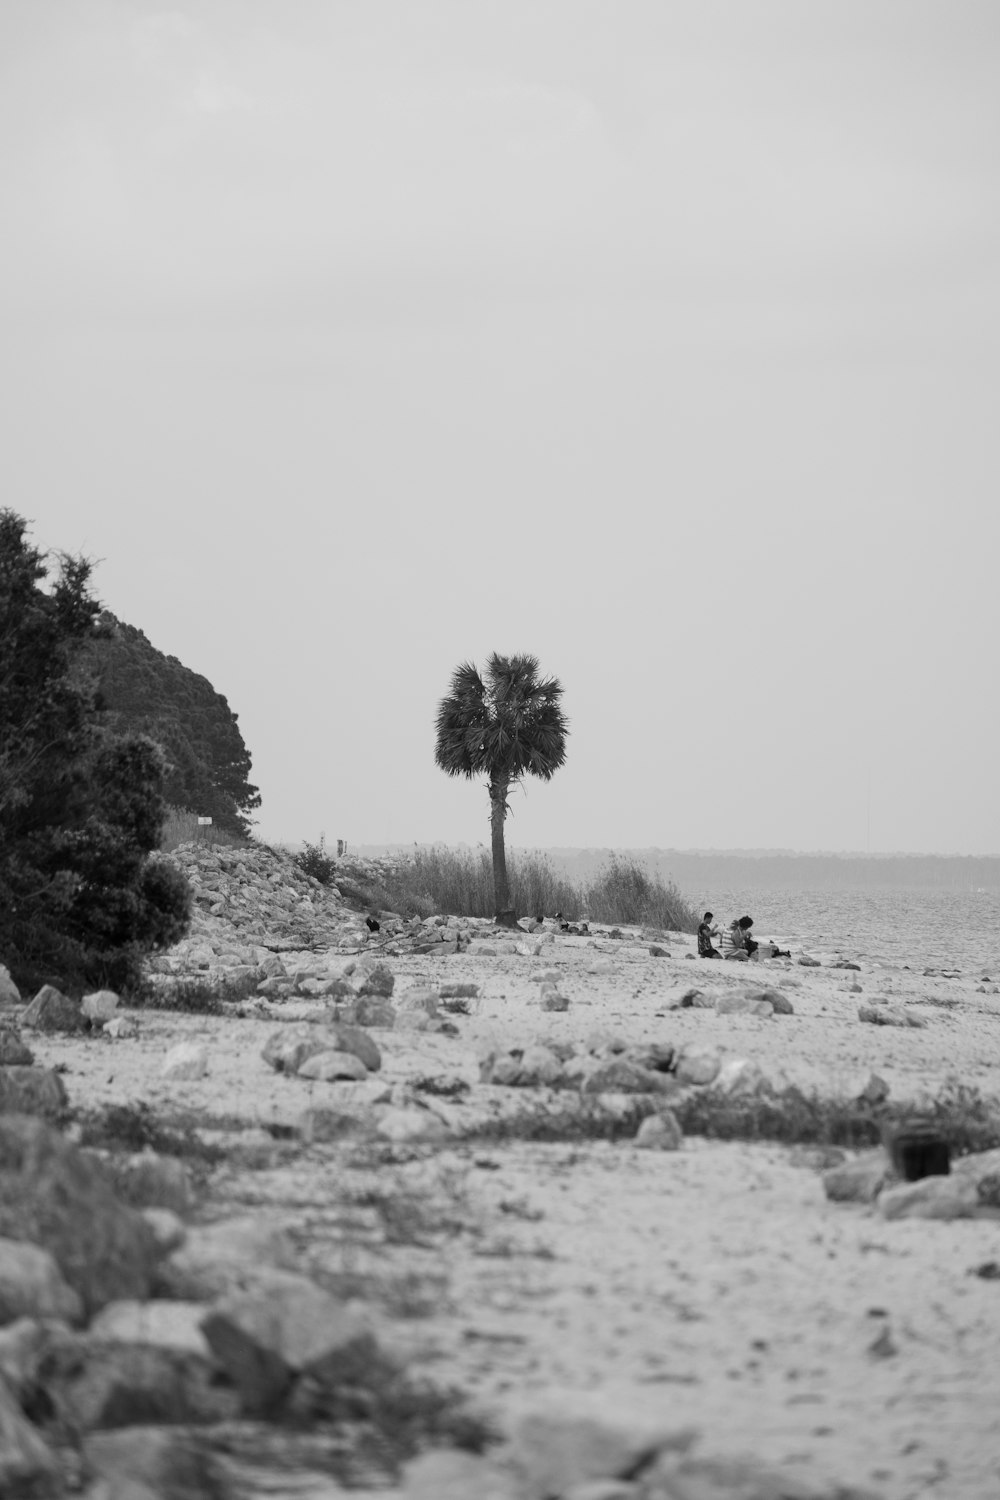 a couple of palm trees sitting on top of a sandy beach